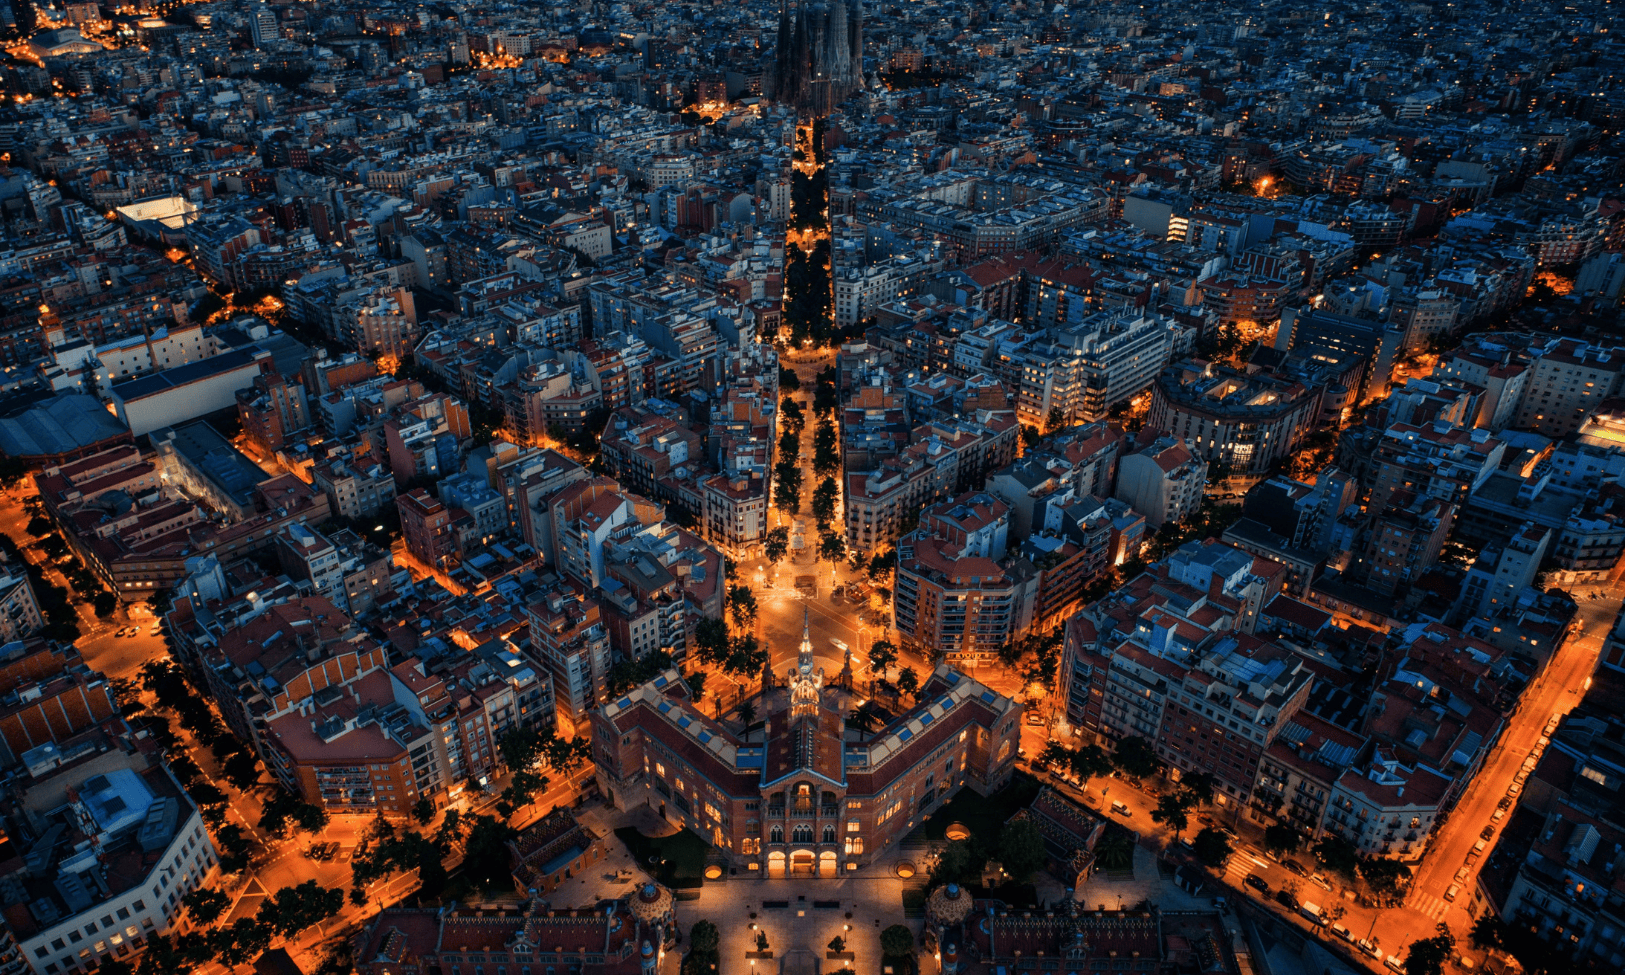 The Unforgettable Things to Do at Night in Barcelona